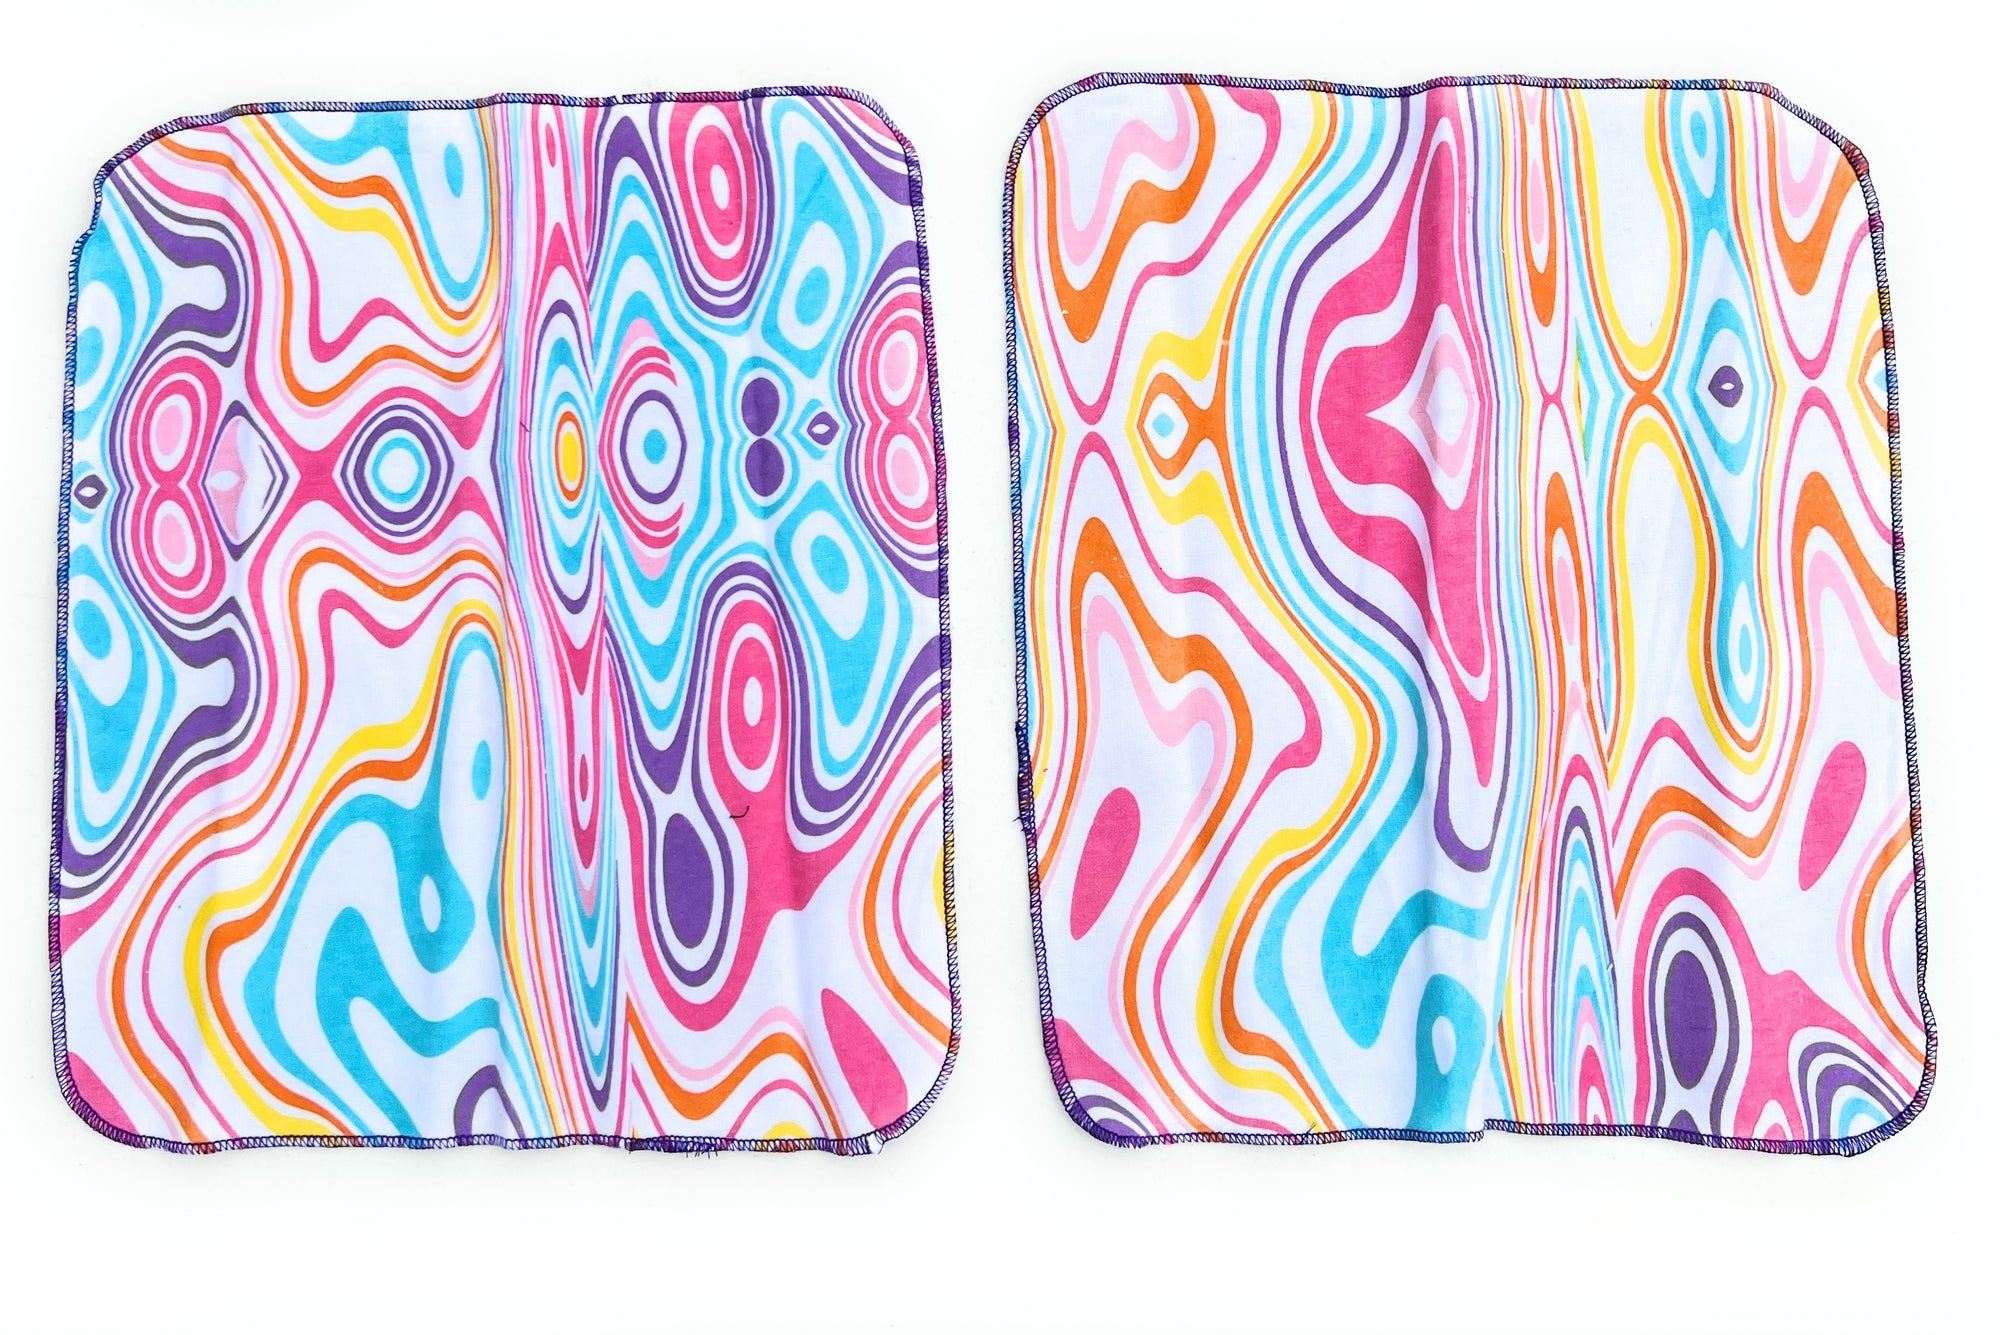 Non Paper Towels Napkins Wavy Psychedelic Large 10" x 12"  in a 6 pack